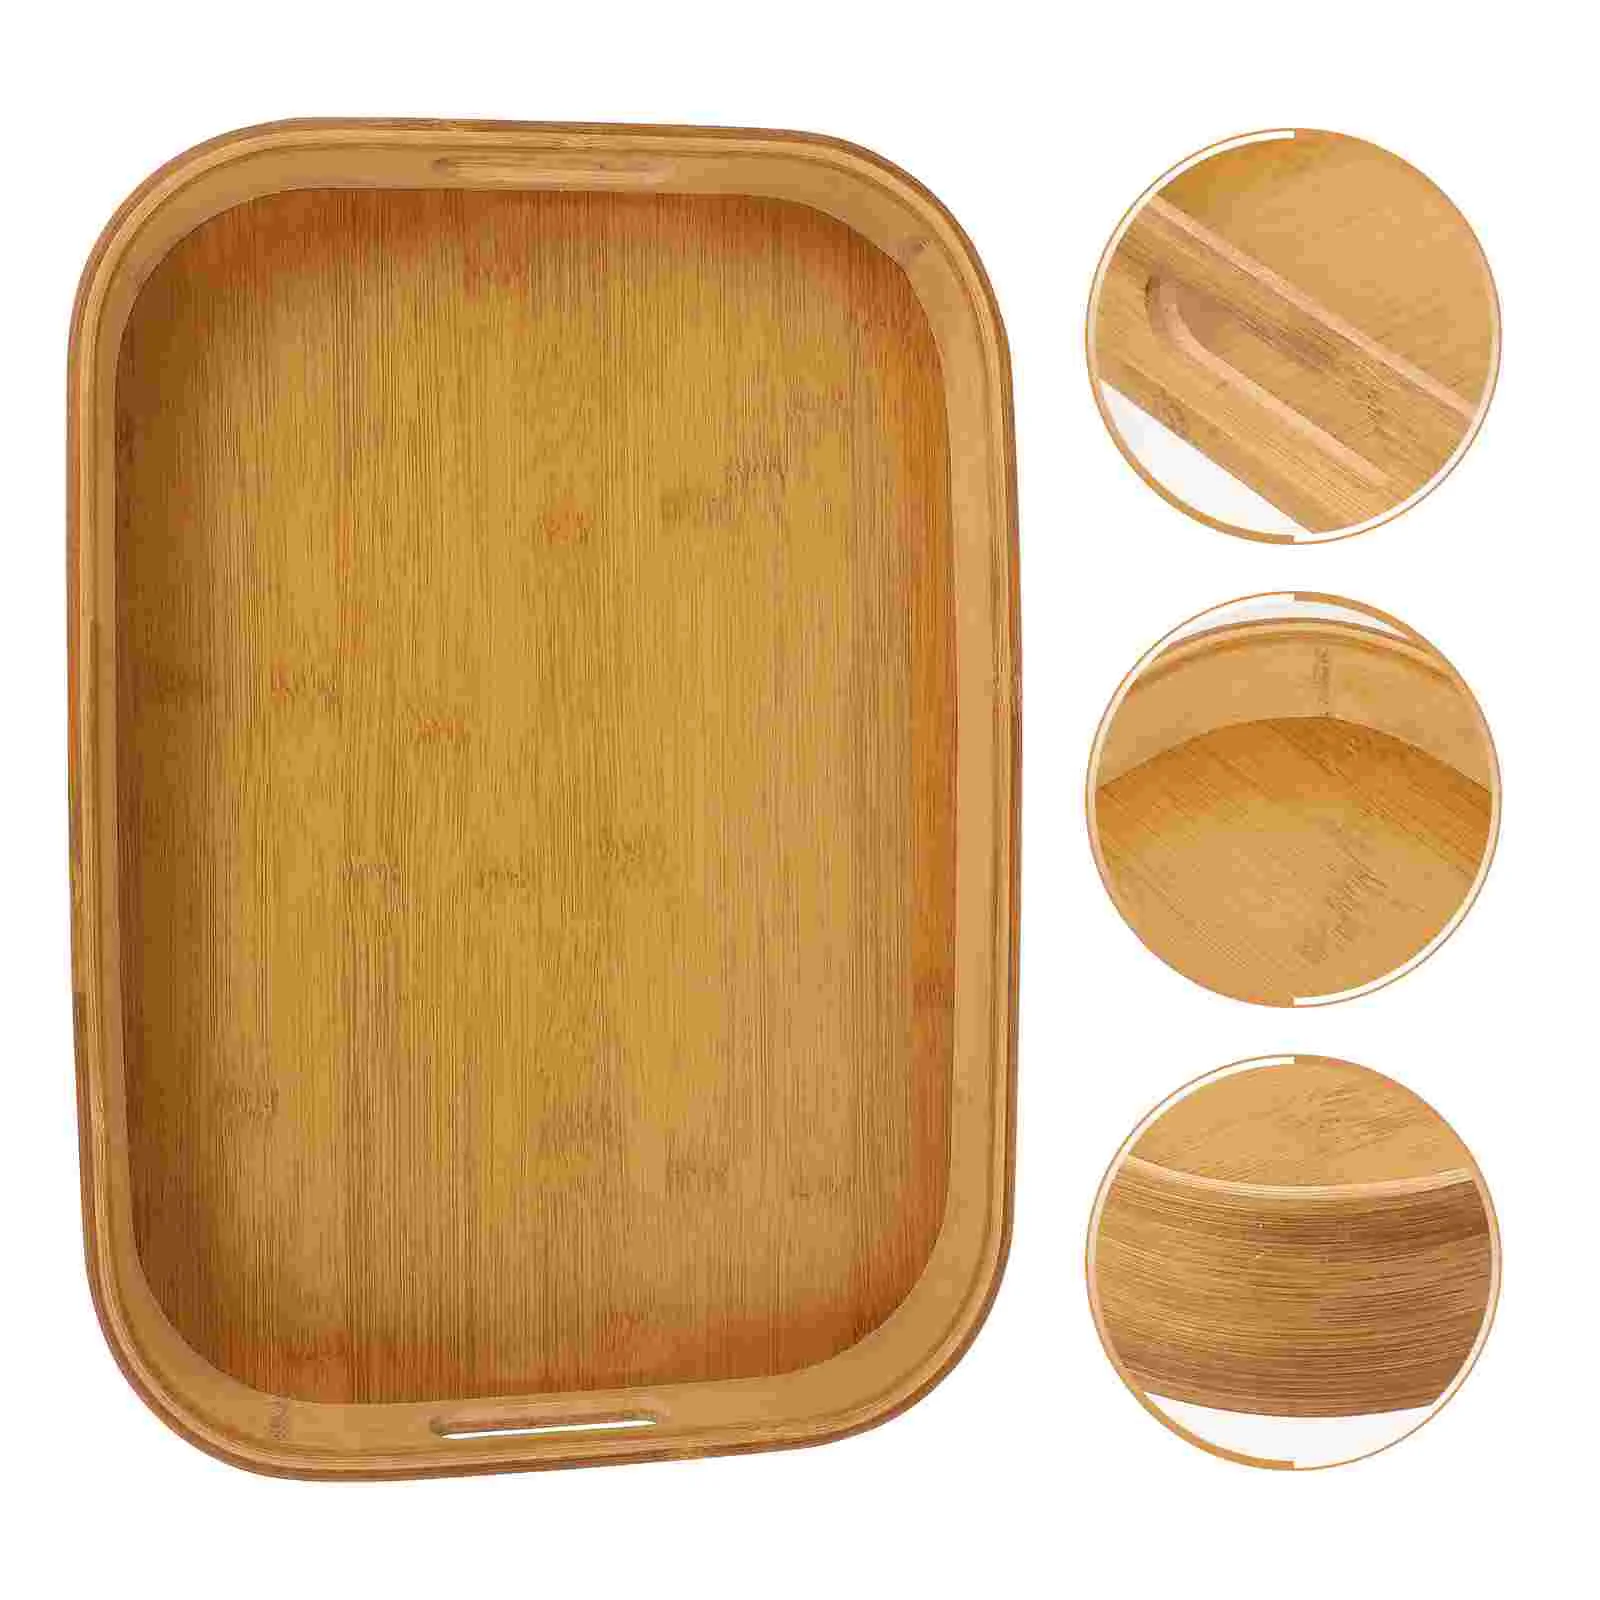 

Wood Serving Tray with Handles Wood Rectangular Platter Coffee Tea Serving Tray for Breakfast Lunch Dinner Appetizers Patio